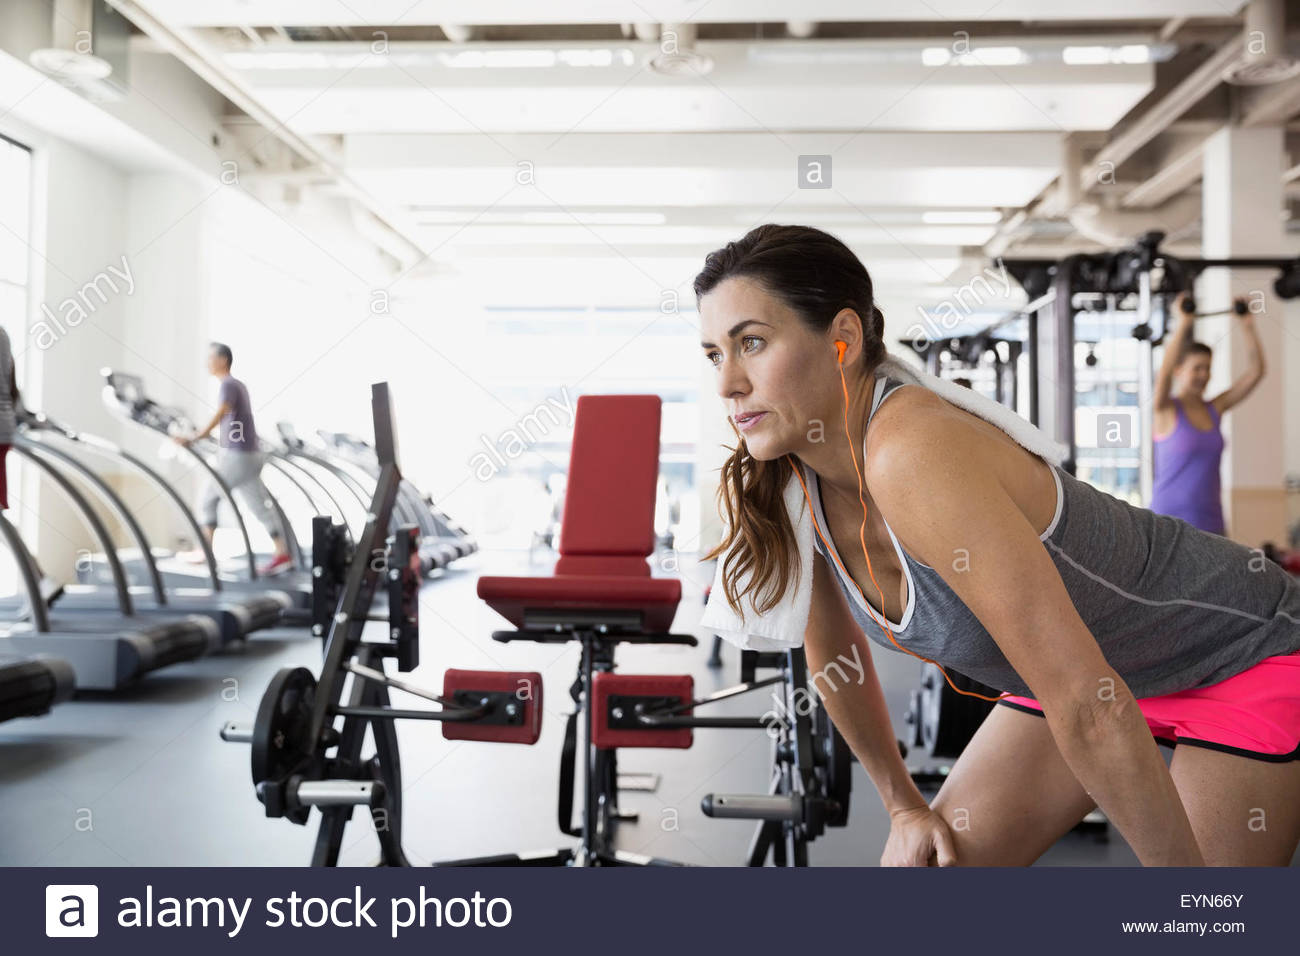 Woman resting with hands on knees at gym Stock Photo